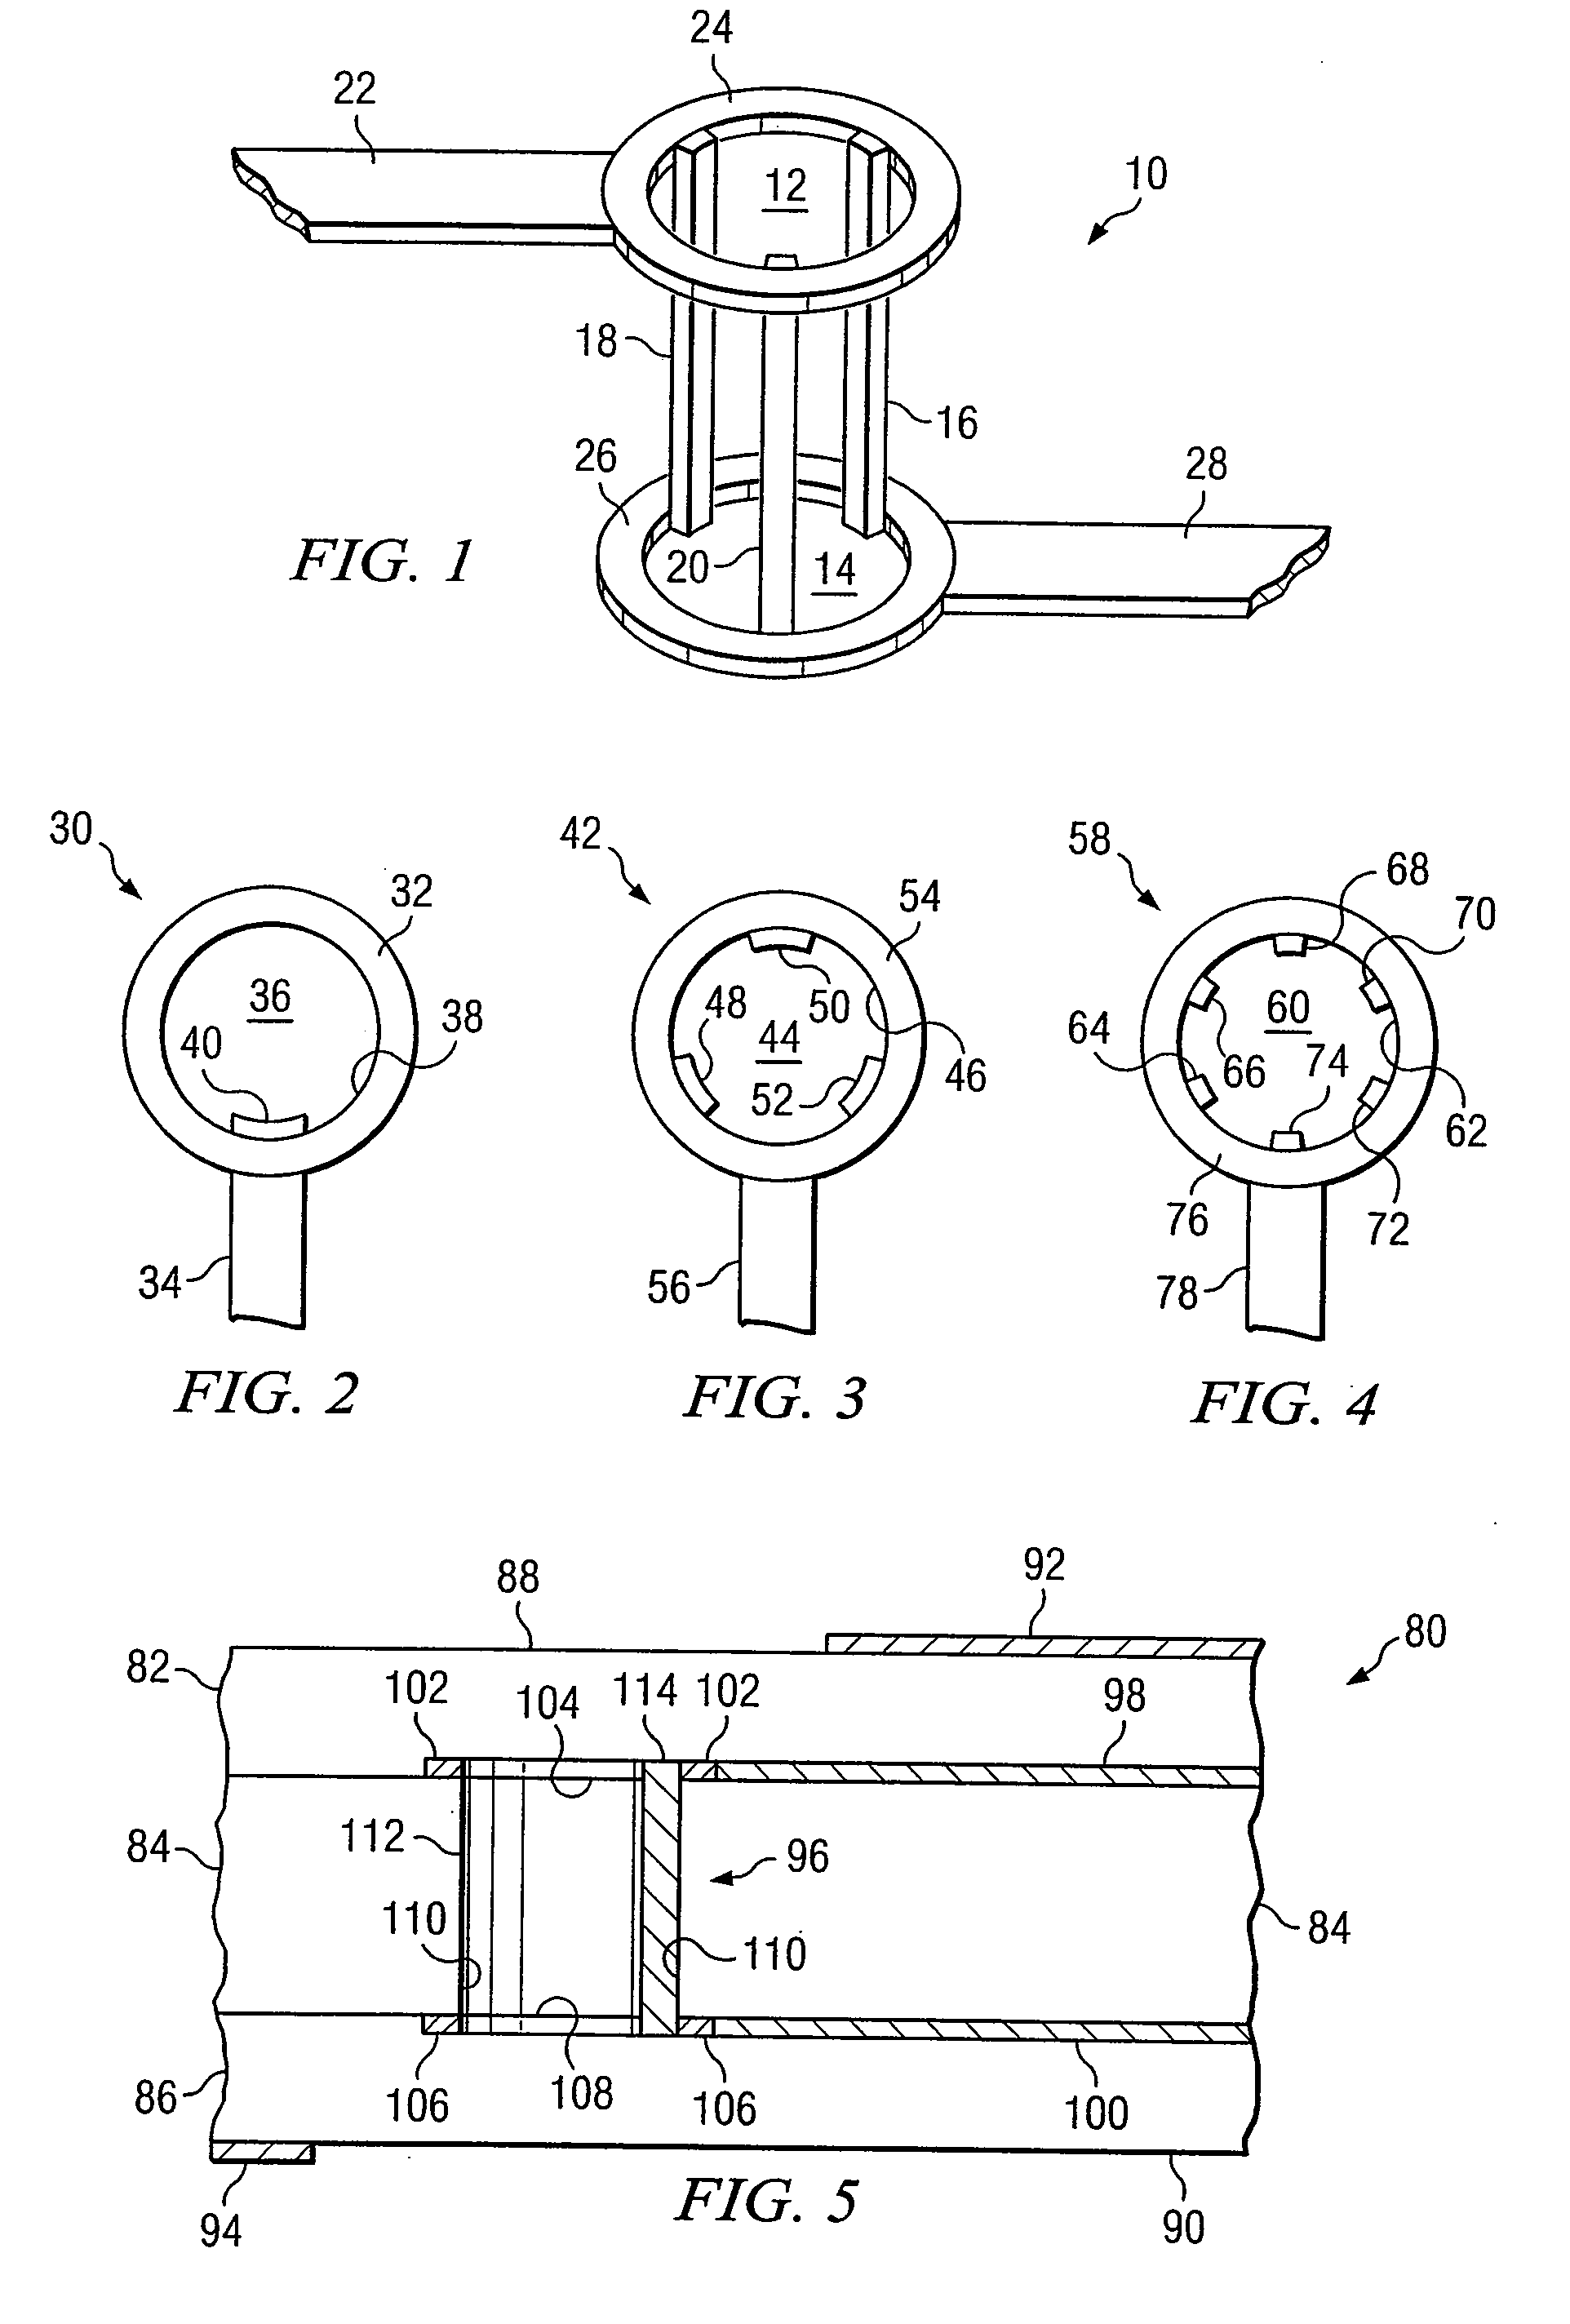 Method, System And Apparatus For Controlled Impedance At Transitional Plated-Through Hole Via Sites Using Barrel Inductance Minimization